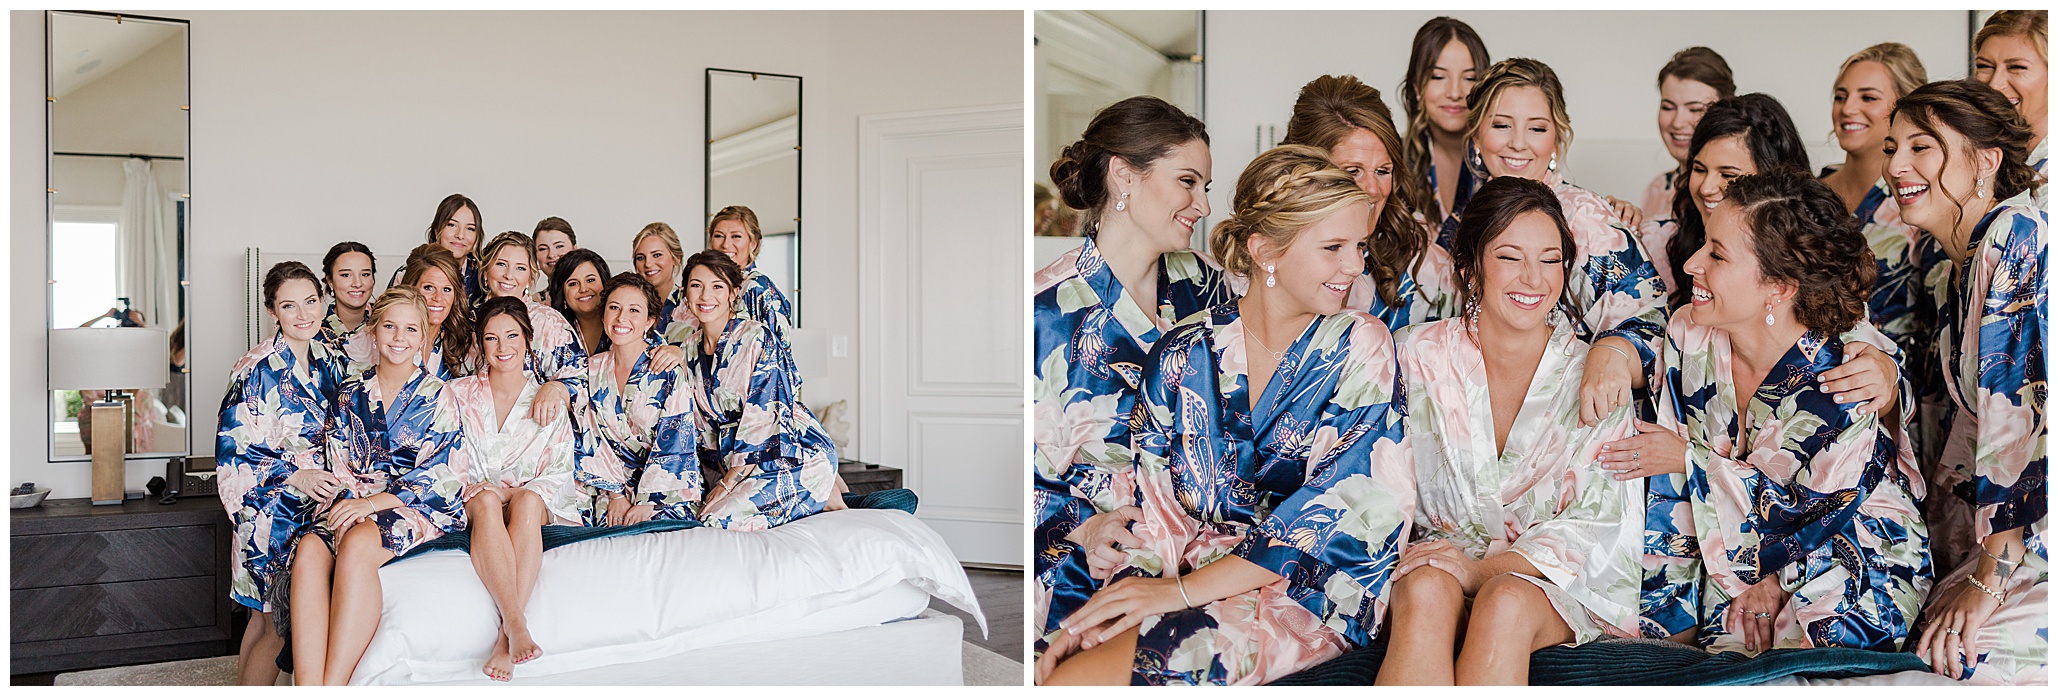 Bridesmaids getting ready at Kingsmill Estate House Luke and Ashley Photography 